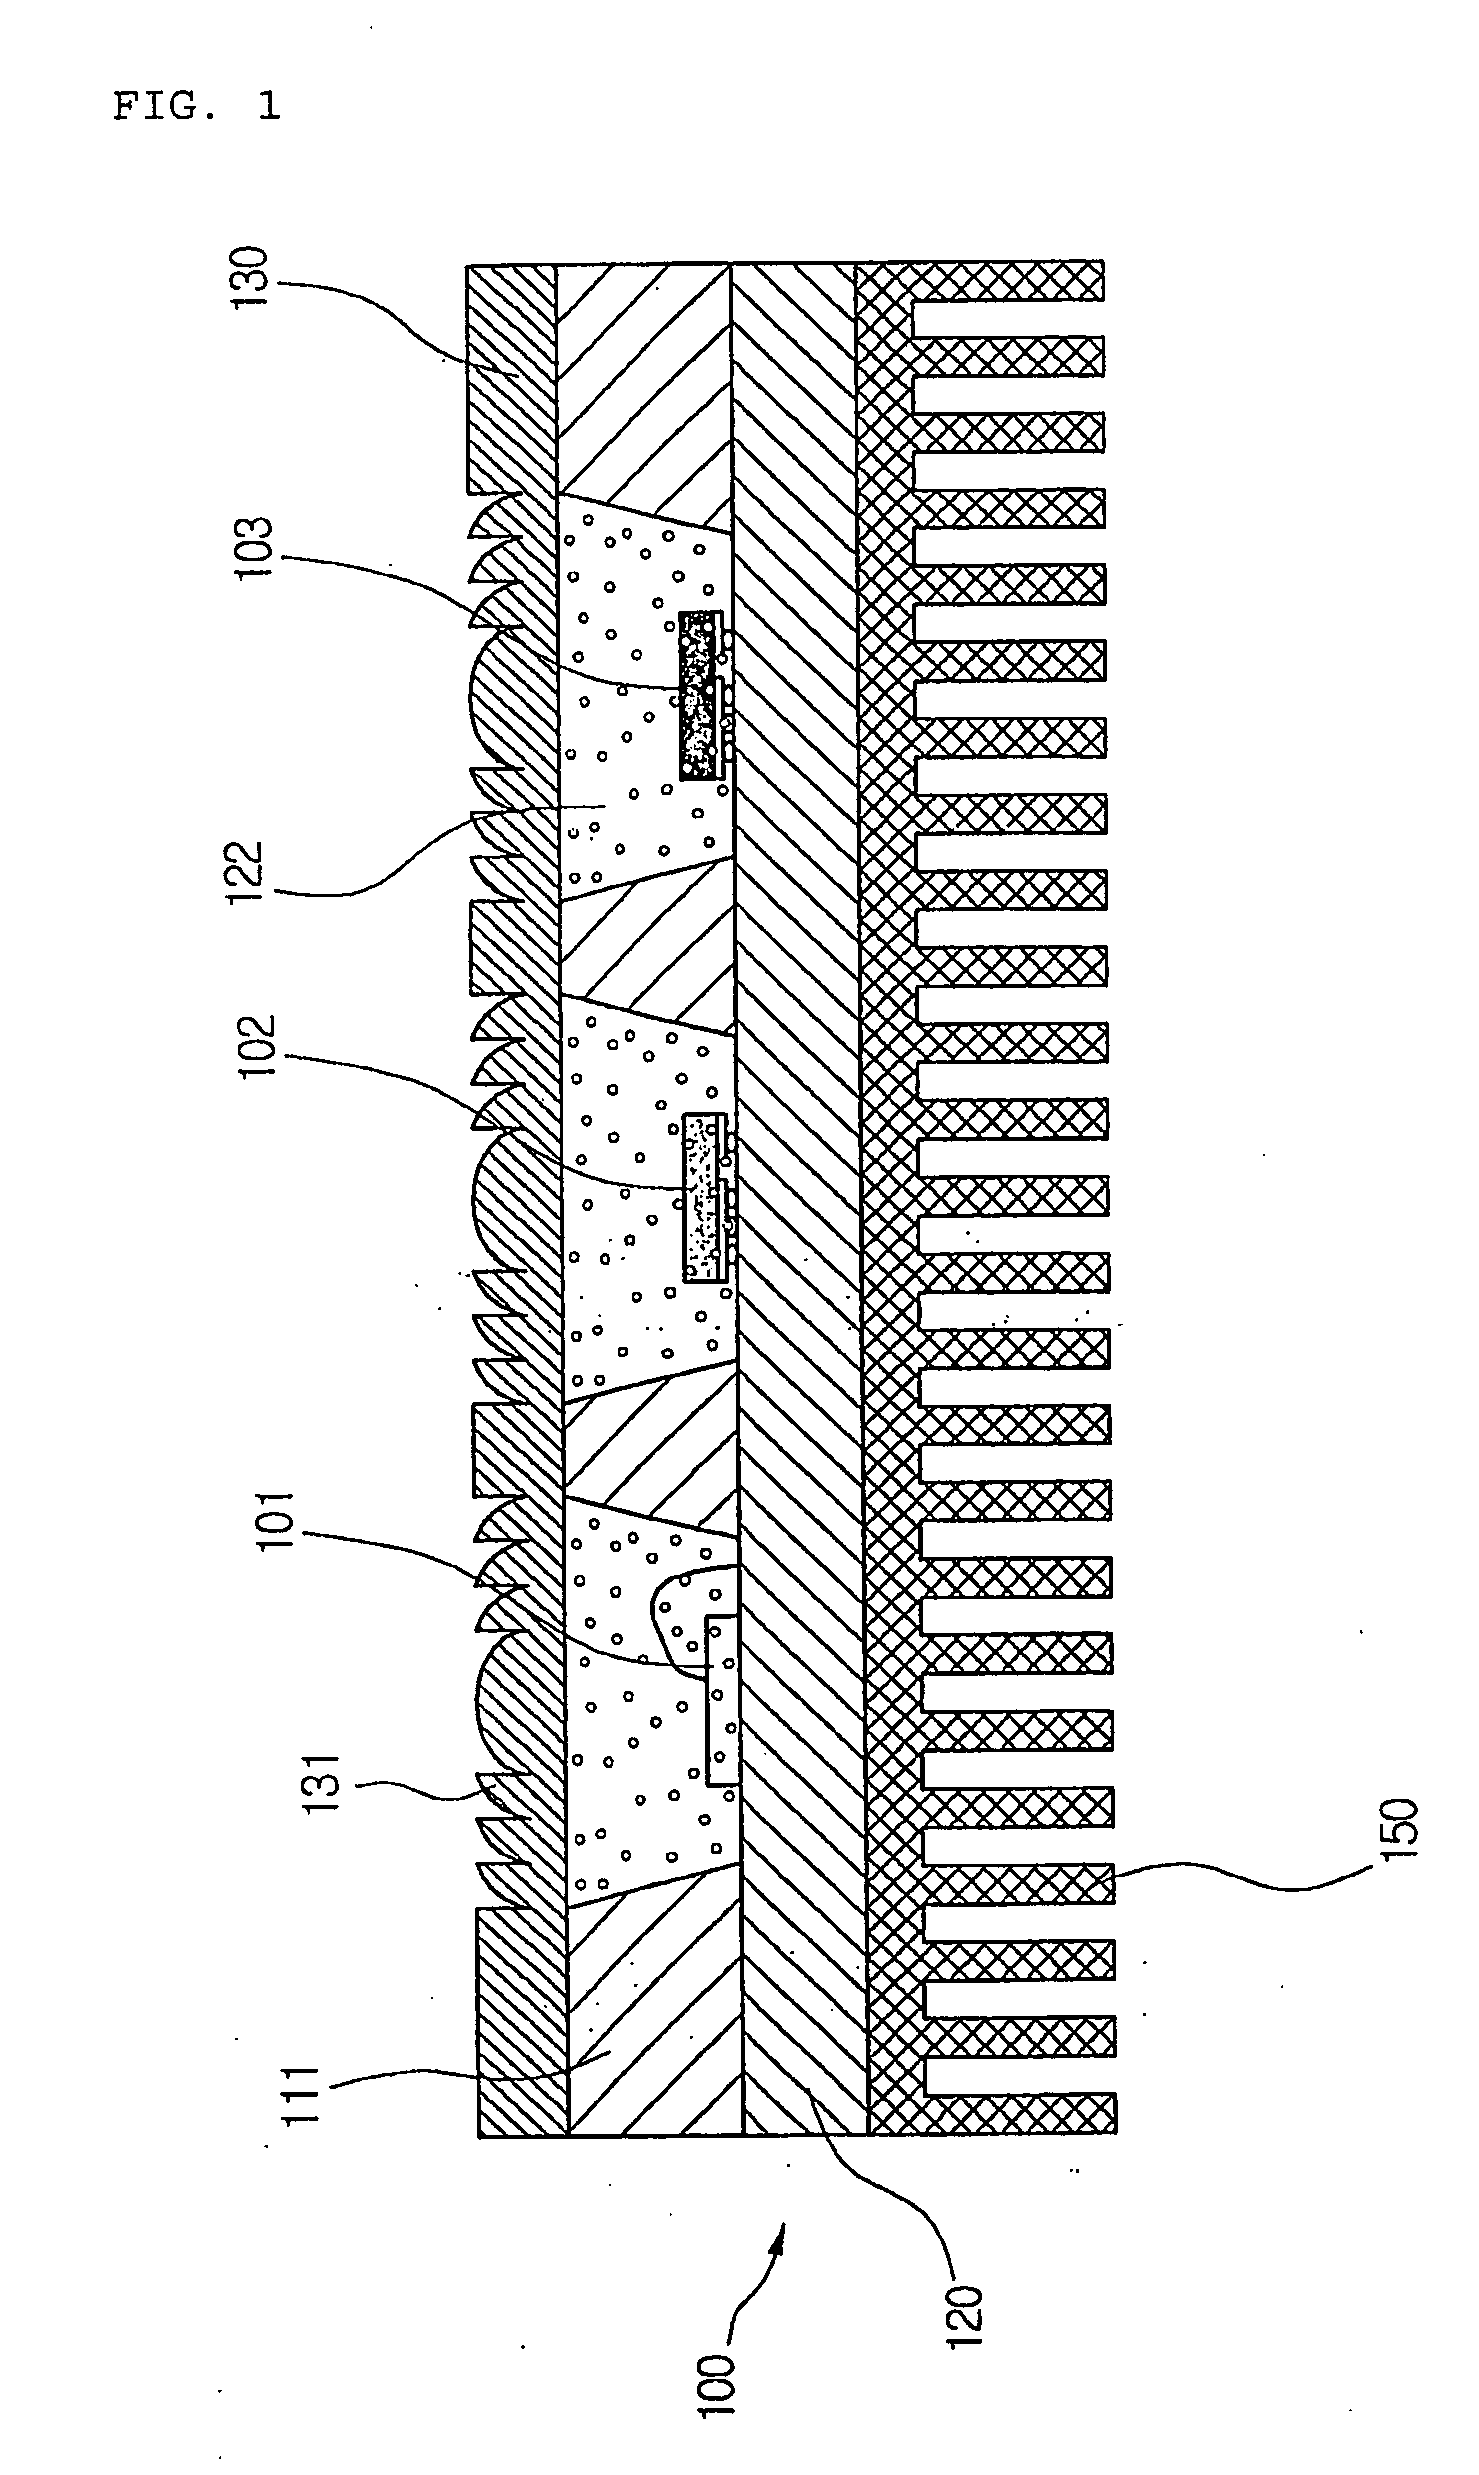 Package for Light Emitting Device and Method for Packaging the Same